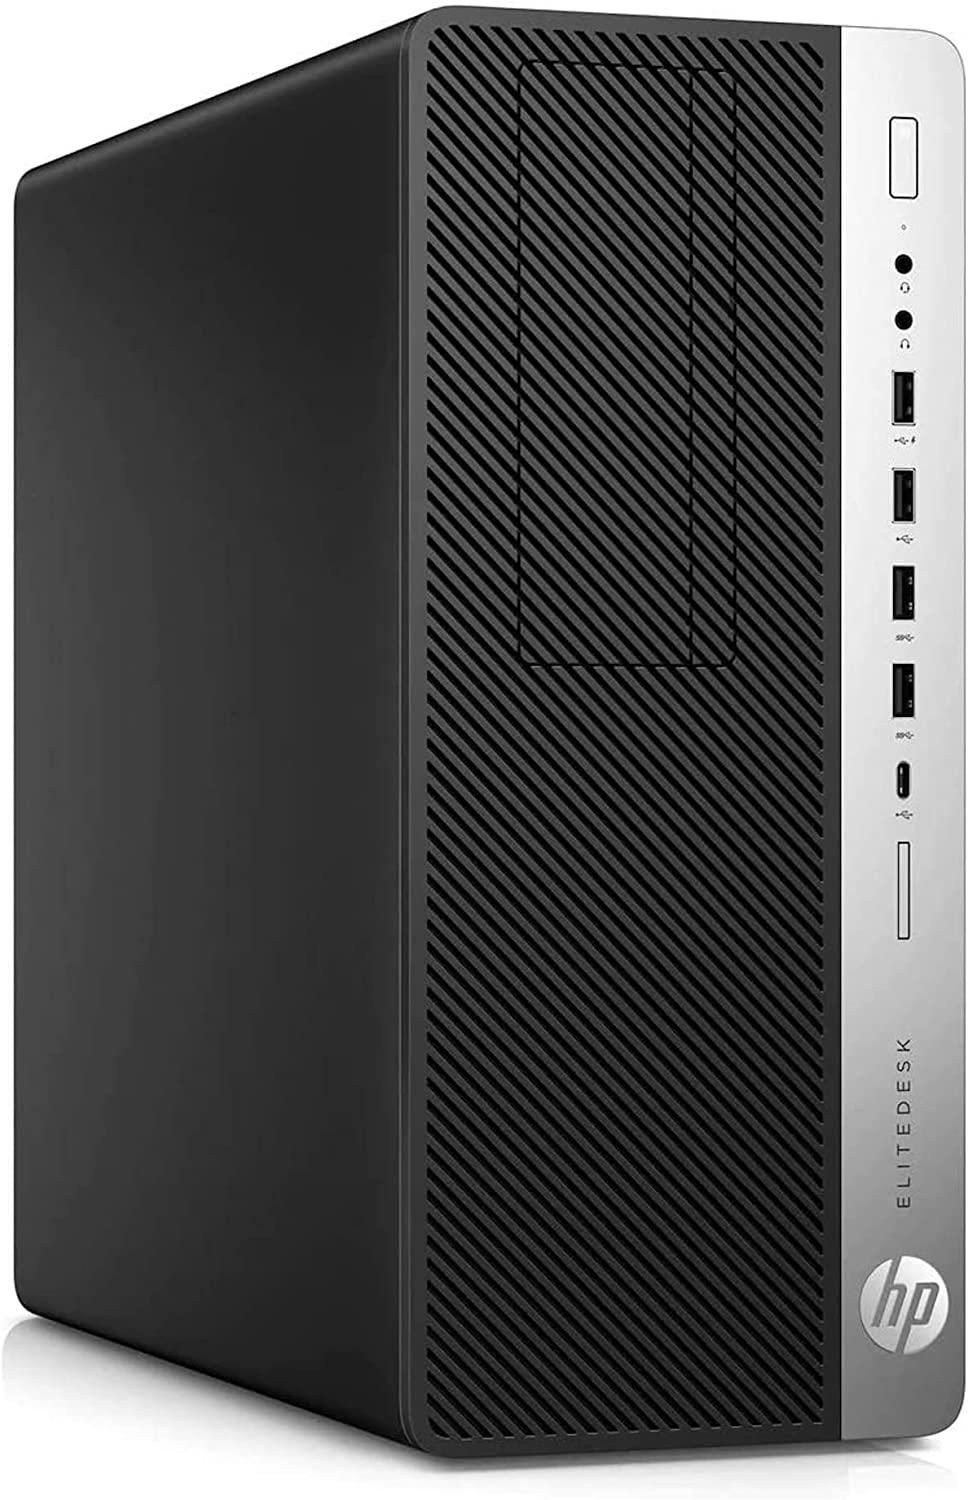 HP EliteDesk 800 G4 Tower Business PC Intel Core i5-8500 Processor 8GB RAM 2TB HDD Intel HD Graphics CPU Only Plus Keyboard & Mouse Boxed 1 Year Warranty